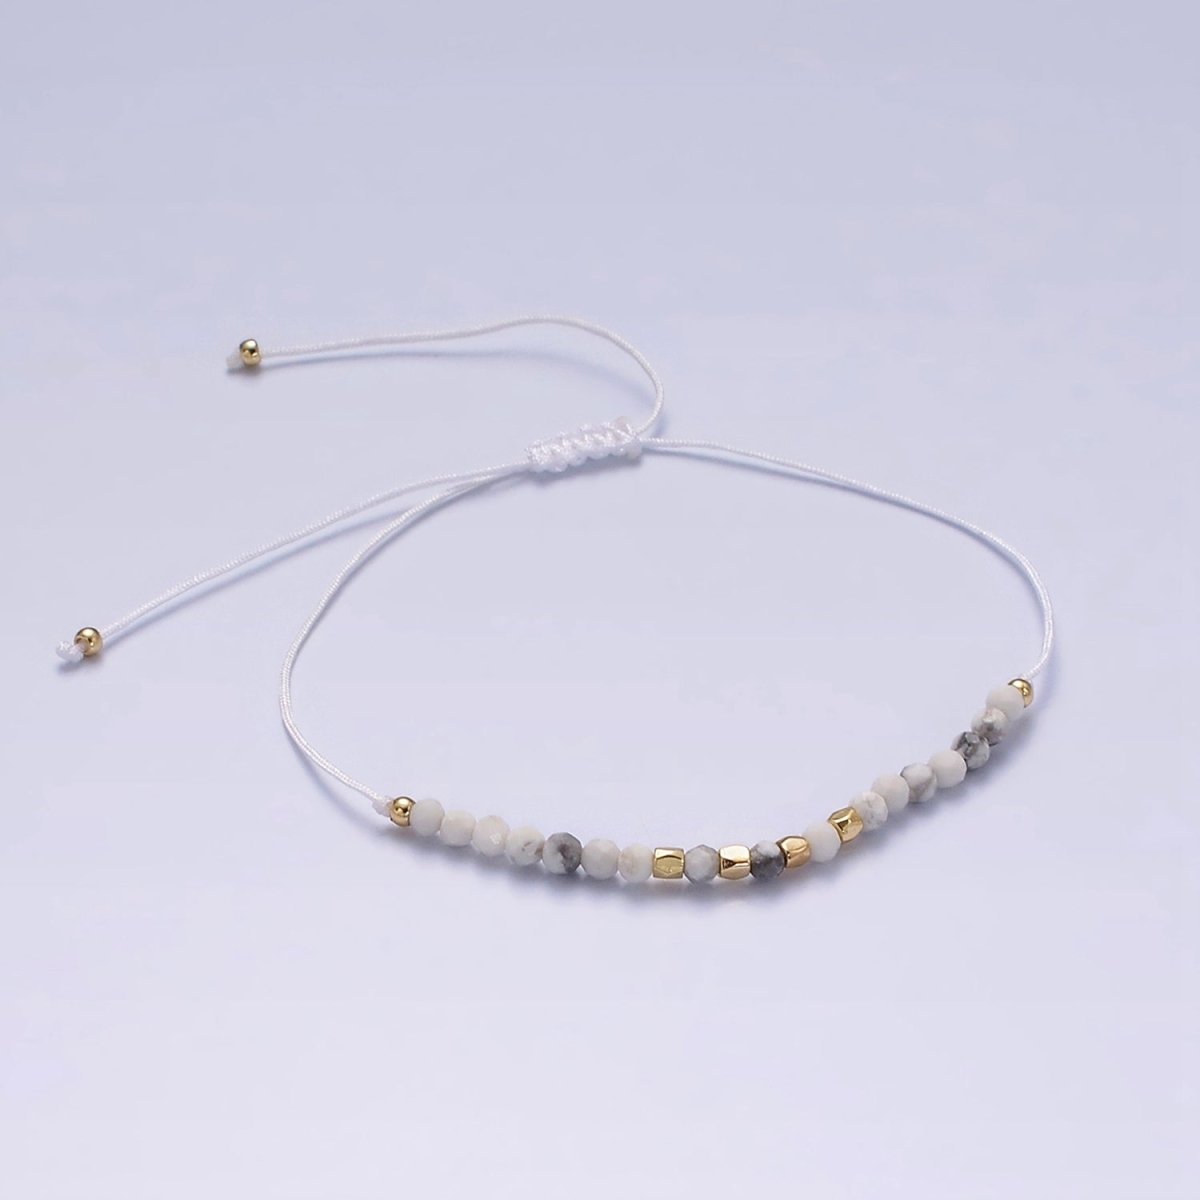 14K Gold Filled Howlite Multifaceted White Cotton String Adjustable Bracelet | WA-2184 - WA-2186 Clearance Pricing - DLUXCA